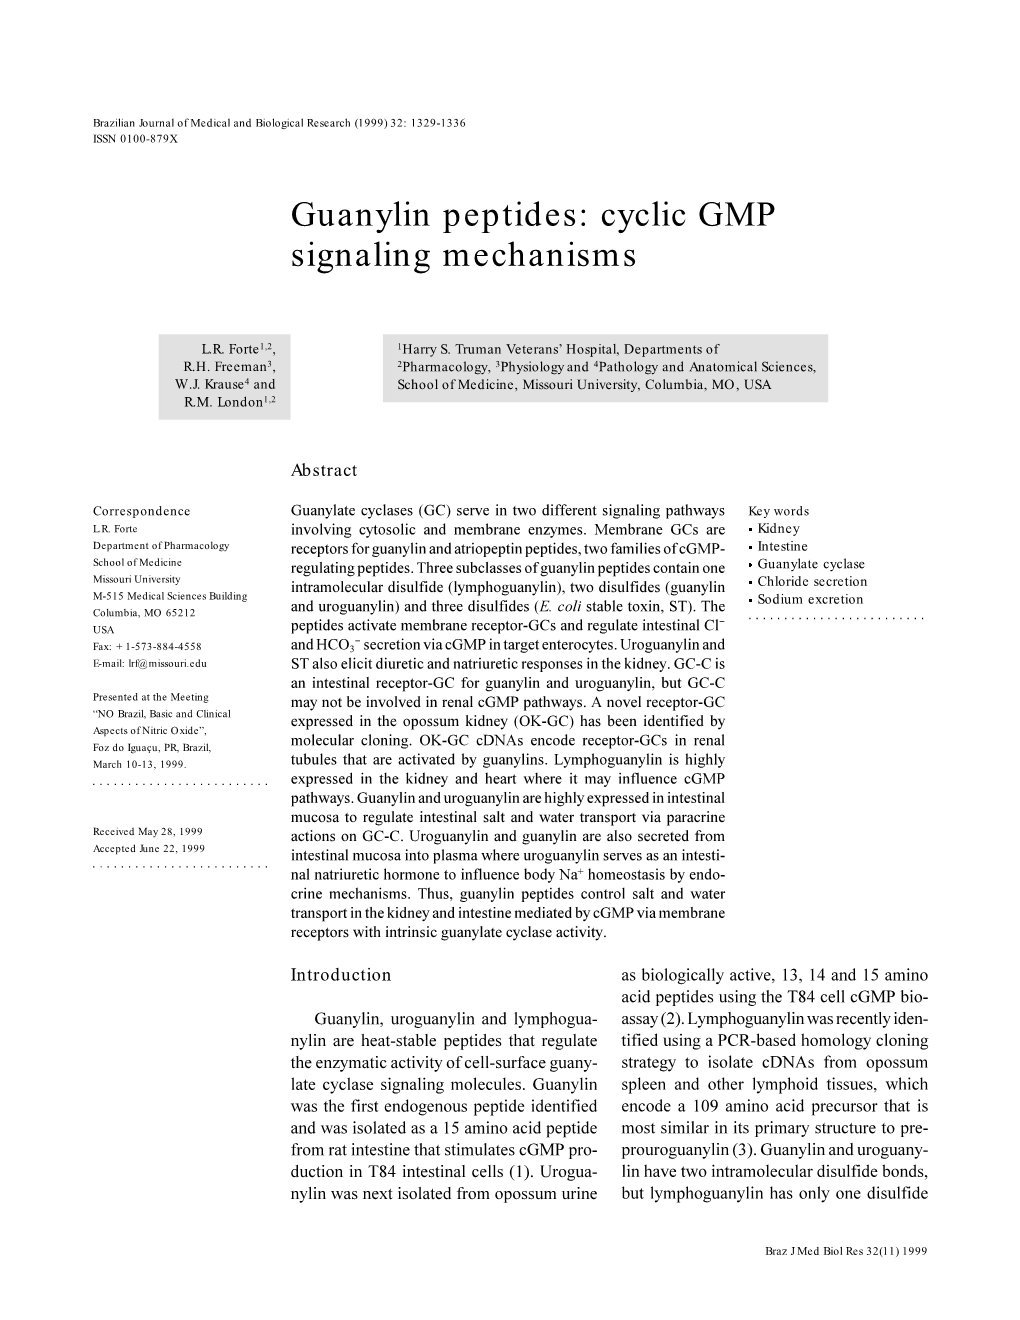 Guanylin Peptides and Cgmp 1329 ISSN 0100-879X